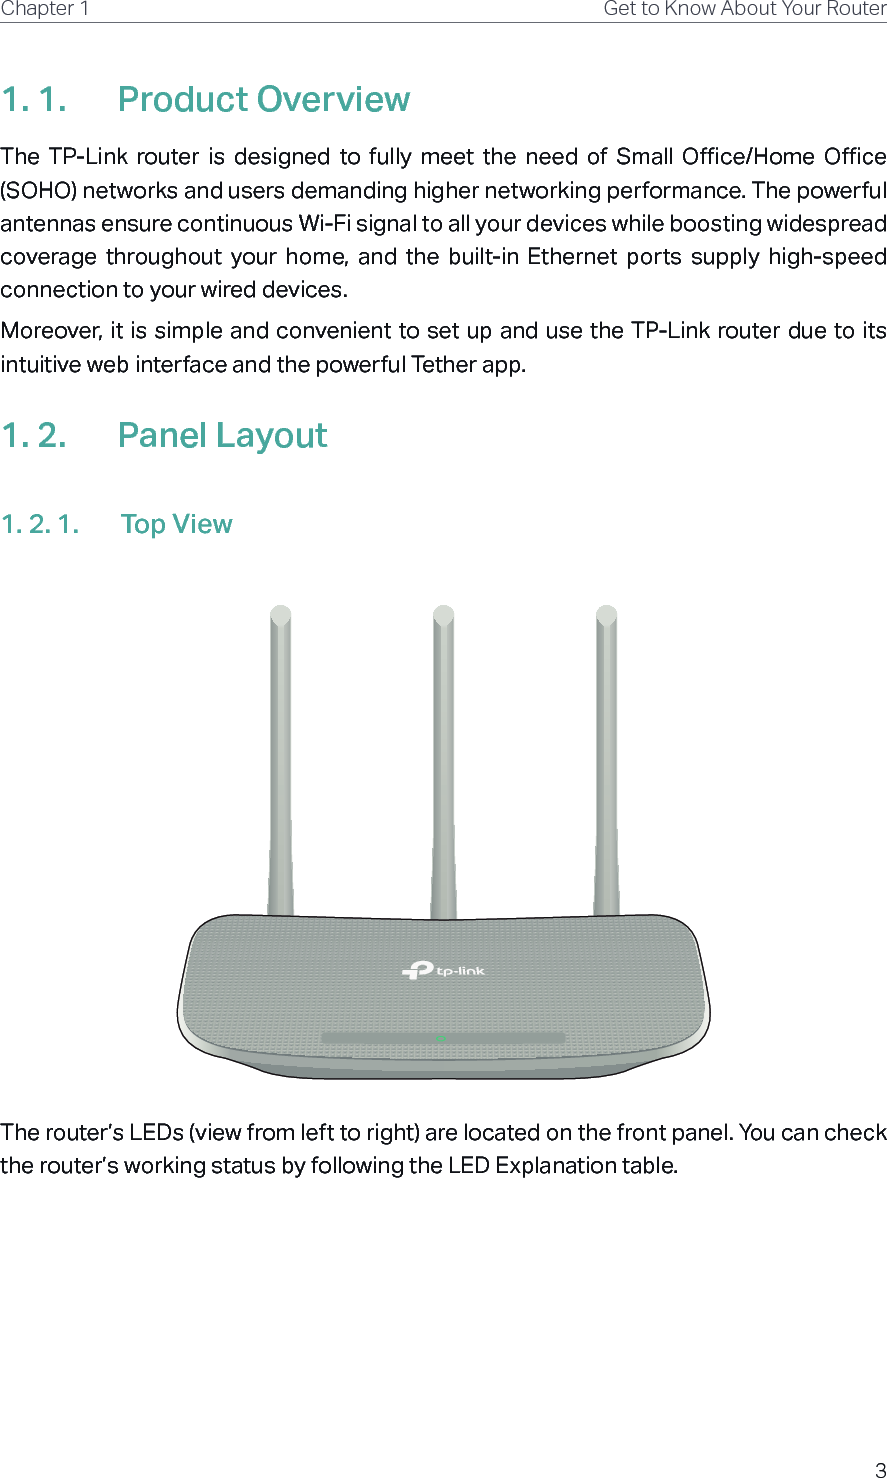 3Chapter 1 Get to Know About Your Router1. 1.  Product OverviewThe  TP-Link  router  is  designed  to  fully  meet  the  need  of  Small  Office/Home  Office (SOHO) networks and users demanding higher networking performance. The powerful antennas ensure continuous Wi-Fi signal to all your devices while boosting widespread coverage  throughout  your  home,  and  the  built-in  Ethernet  ports  supply  high-speed connection to your wired devices.Moreover, it is simple and convenient to set up and use the TP-Link router due to its intuitive web interface and the powerful Tether app.1. 2.  Panel Layout1. 2. 1.  Top ViewThe router’s LEDs (view from left to right) are located on the front panel. You can check the router’s working status by following the LED Explanation table.